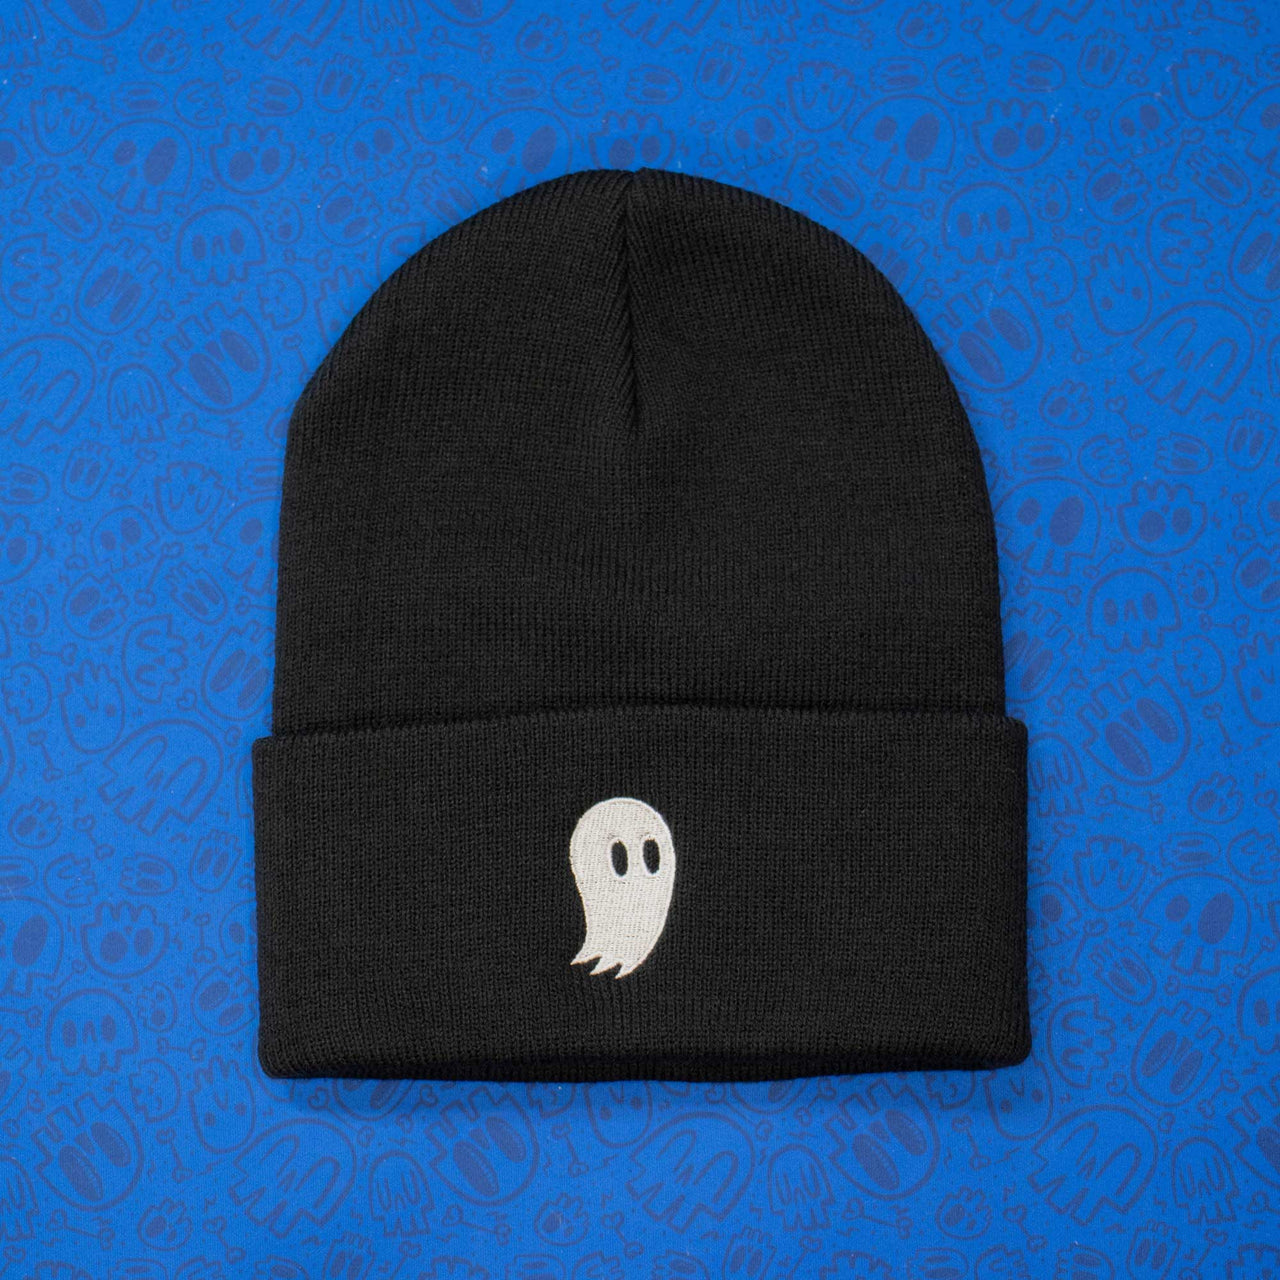 Fred the Ghost Beanie